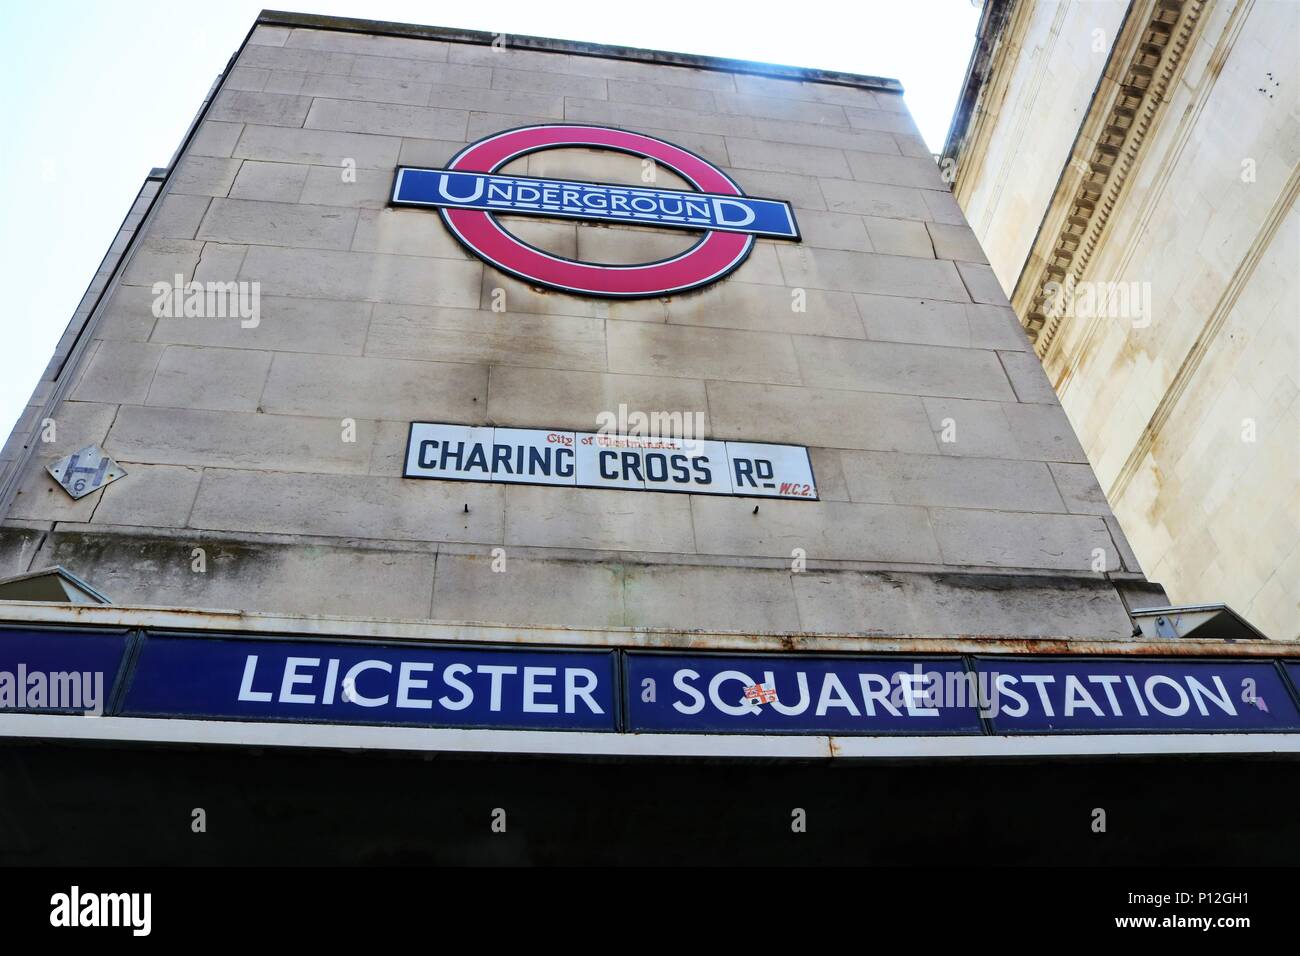 Leicester Square London Underground Tube Station, Charing Cross Road, London, UK Stock Photo